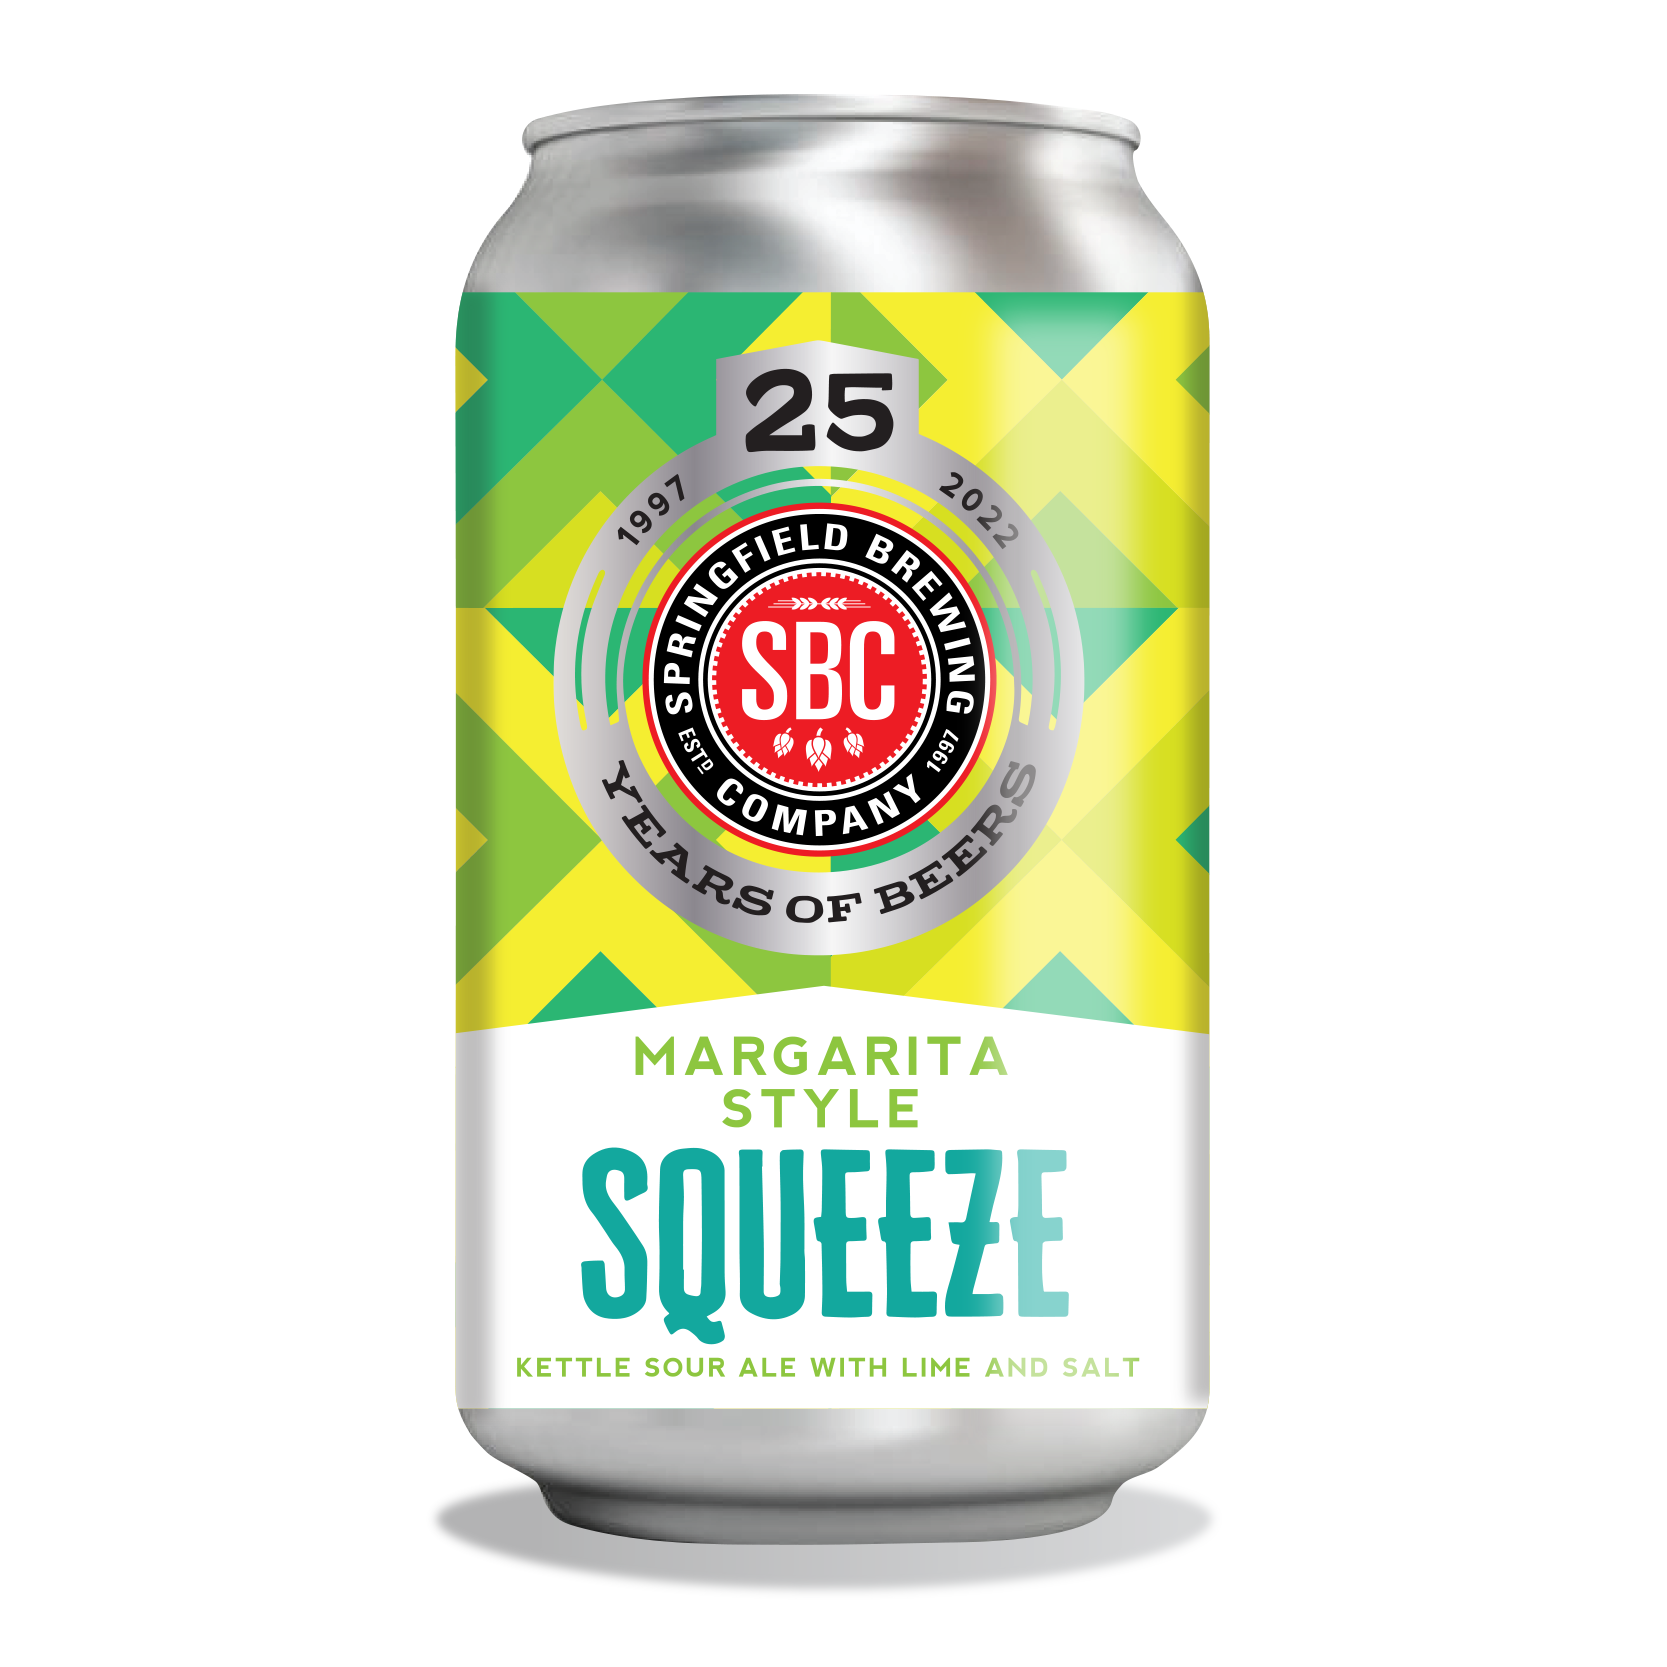 https://brewery.springfieldbrewingco.com/wp-content/uploads/2022/03/25thMargaritaSqueezeUpdate_CanWebsite.png